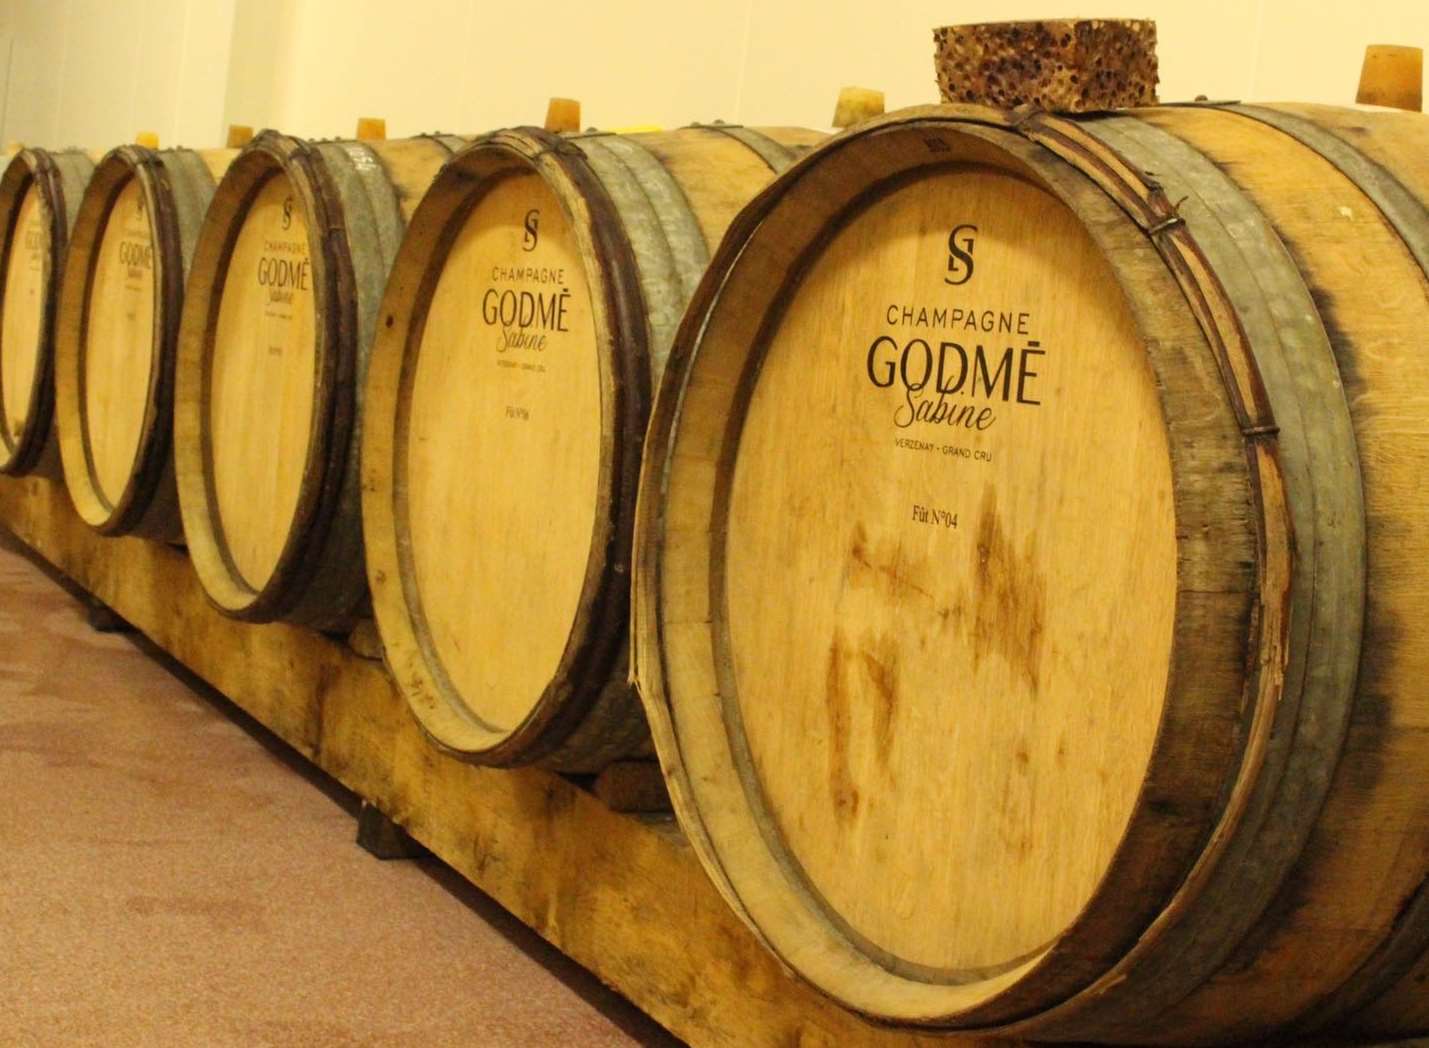 Champagne Godme Sabine located at Verzenay is a family-run champagne house